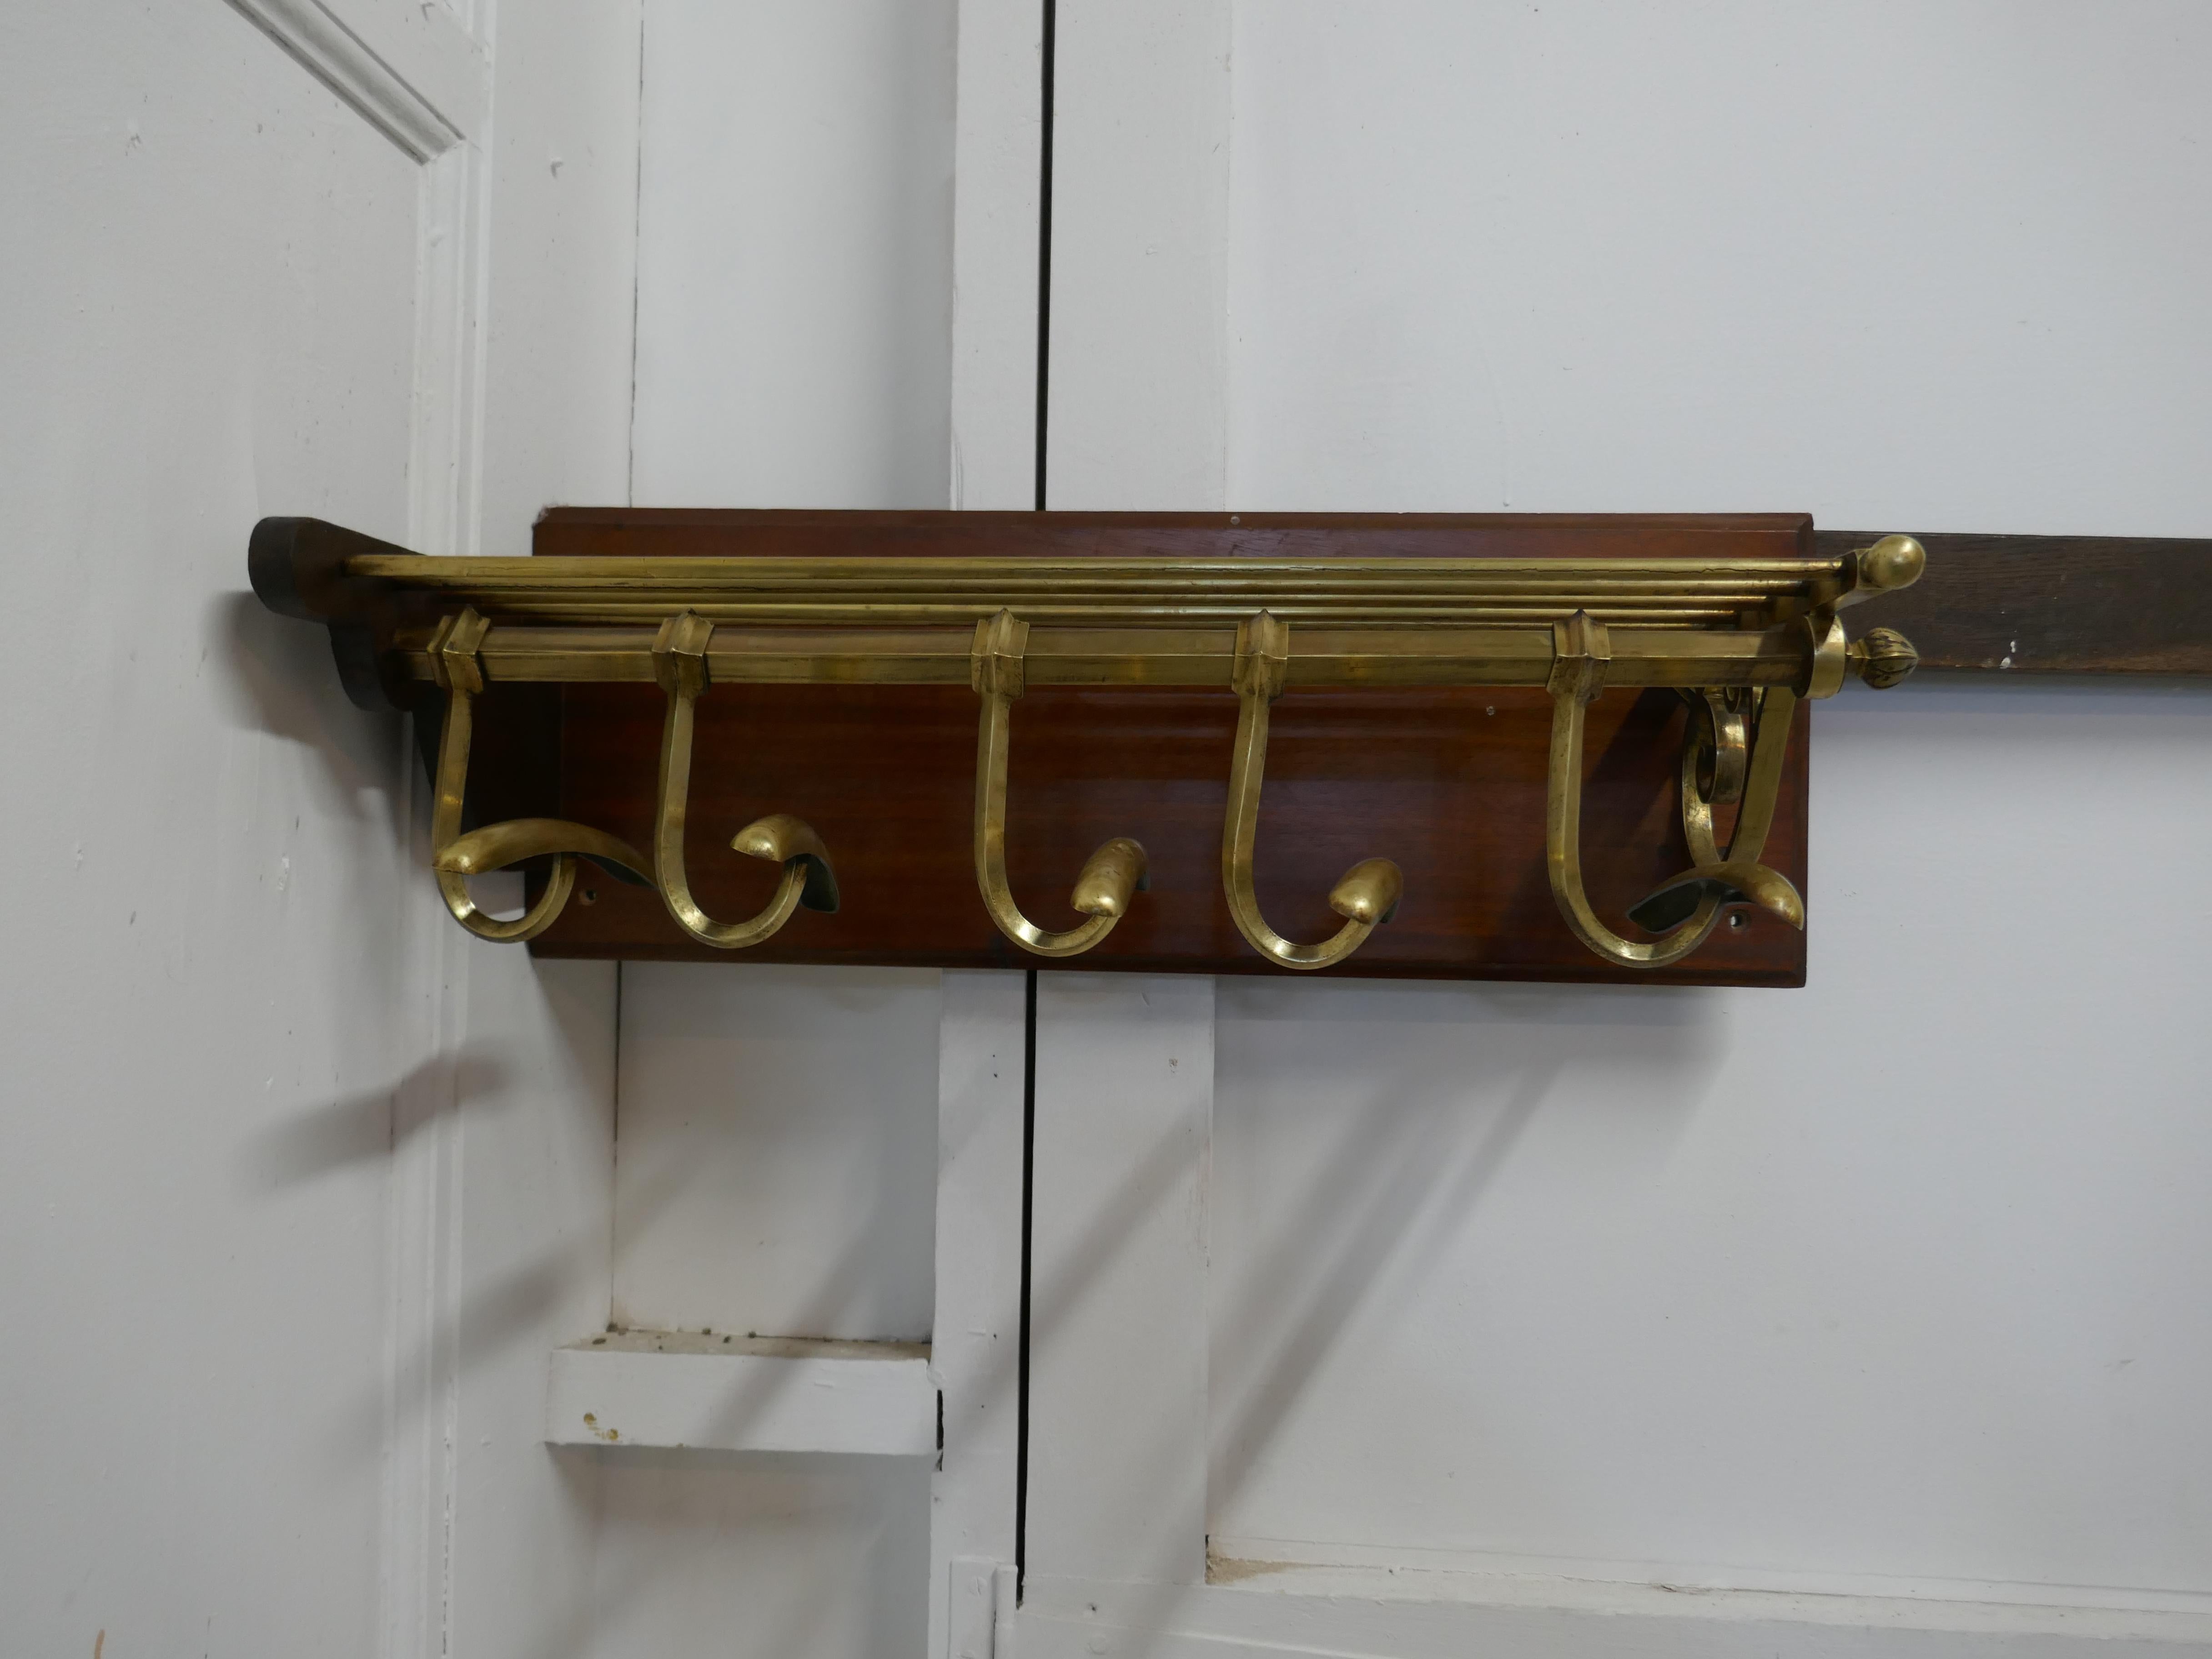 French Art Deco brass hat and coat rack, Pullman Railway train style

 This Art Deco style hat and coat rack has 5 sliding hooks and an upper railed shelf. This is a corner fitting piece. With one scroll end and it is fitted on a mahogany back